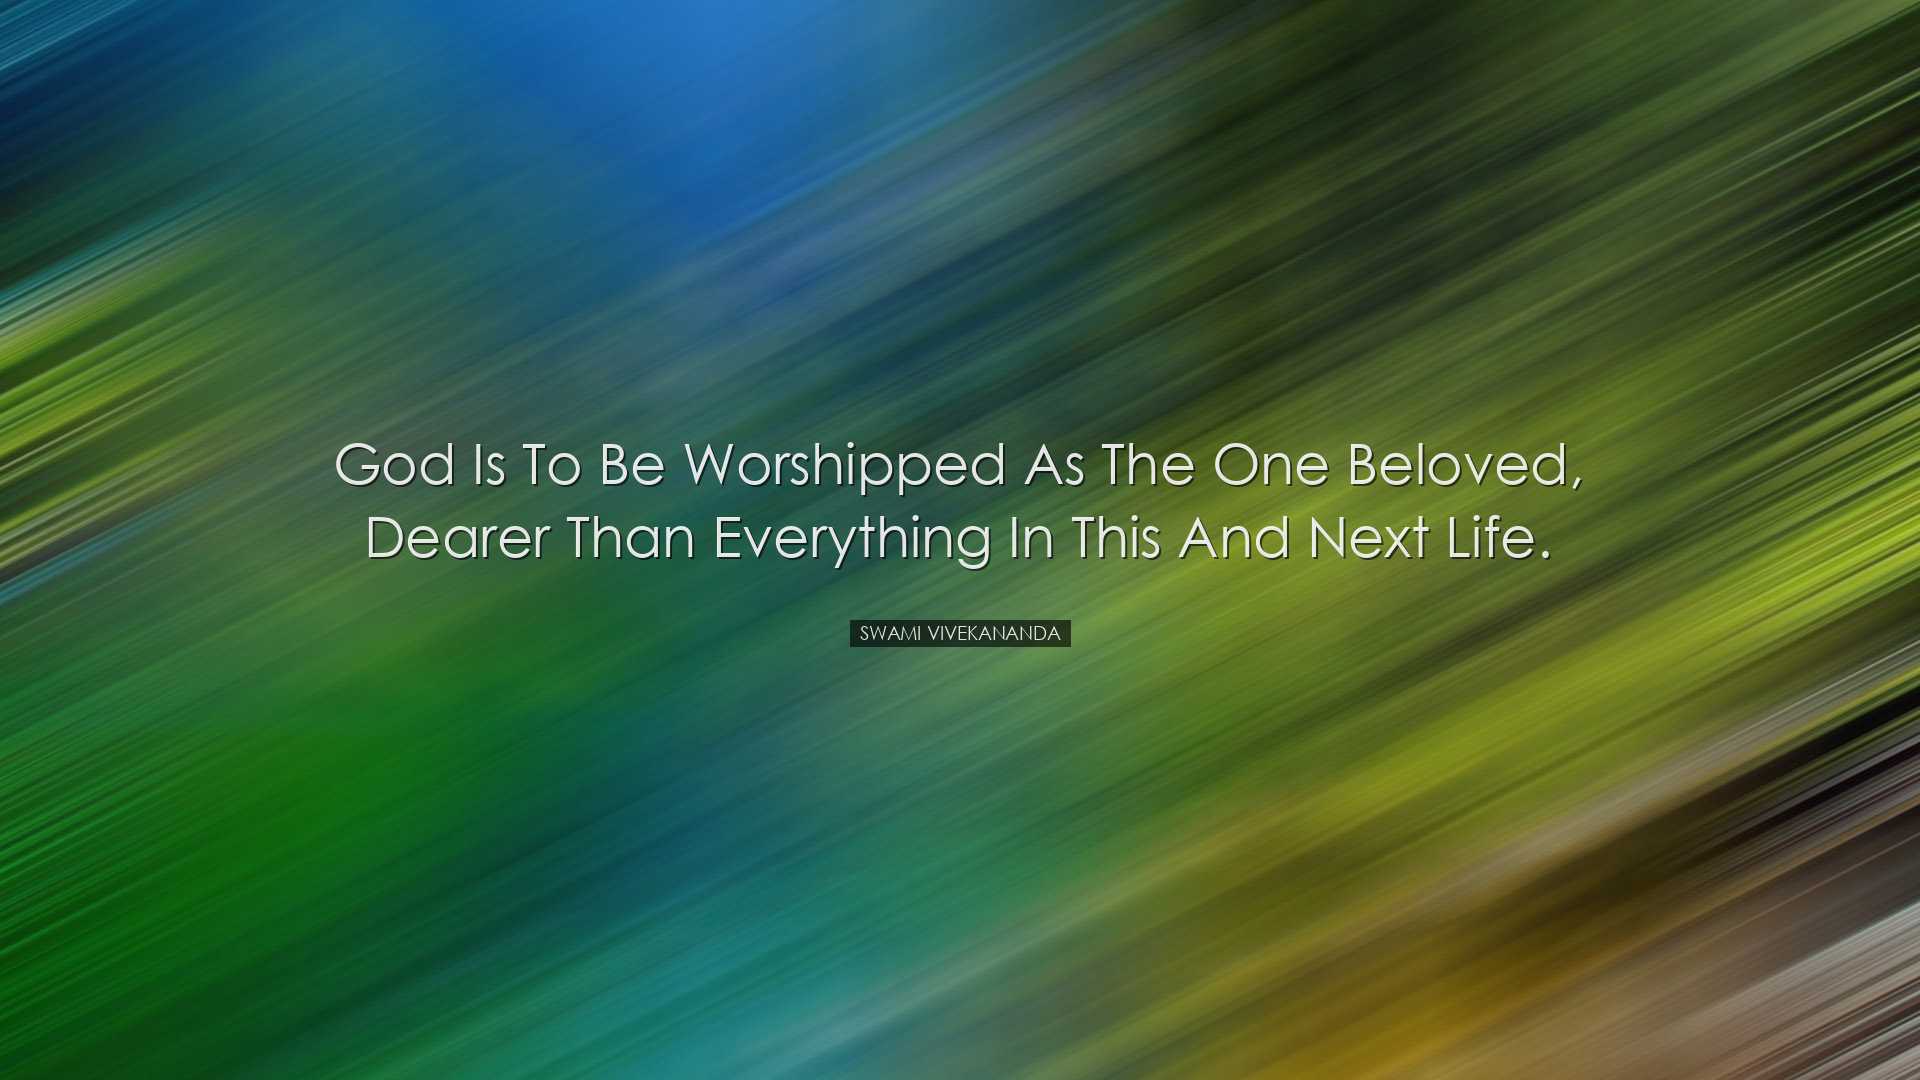 God is to be worshipped as the one beloved, dearer than everything